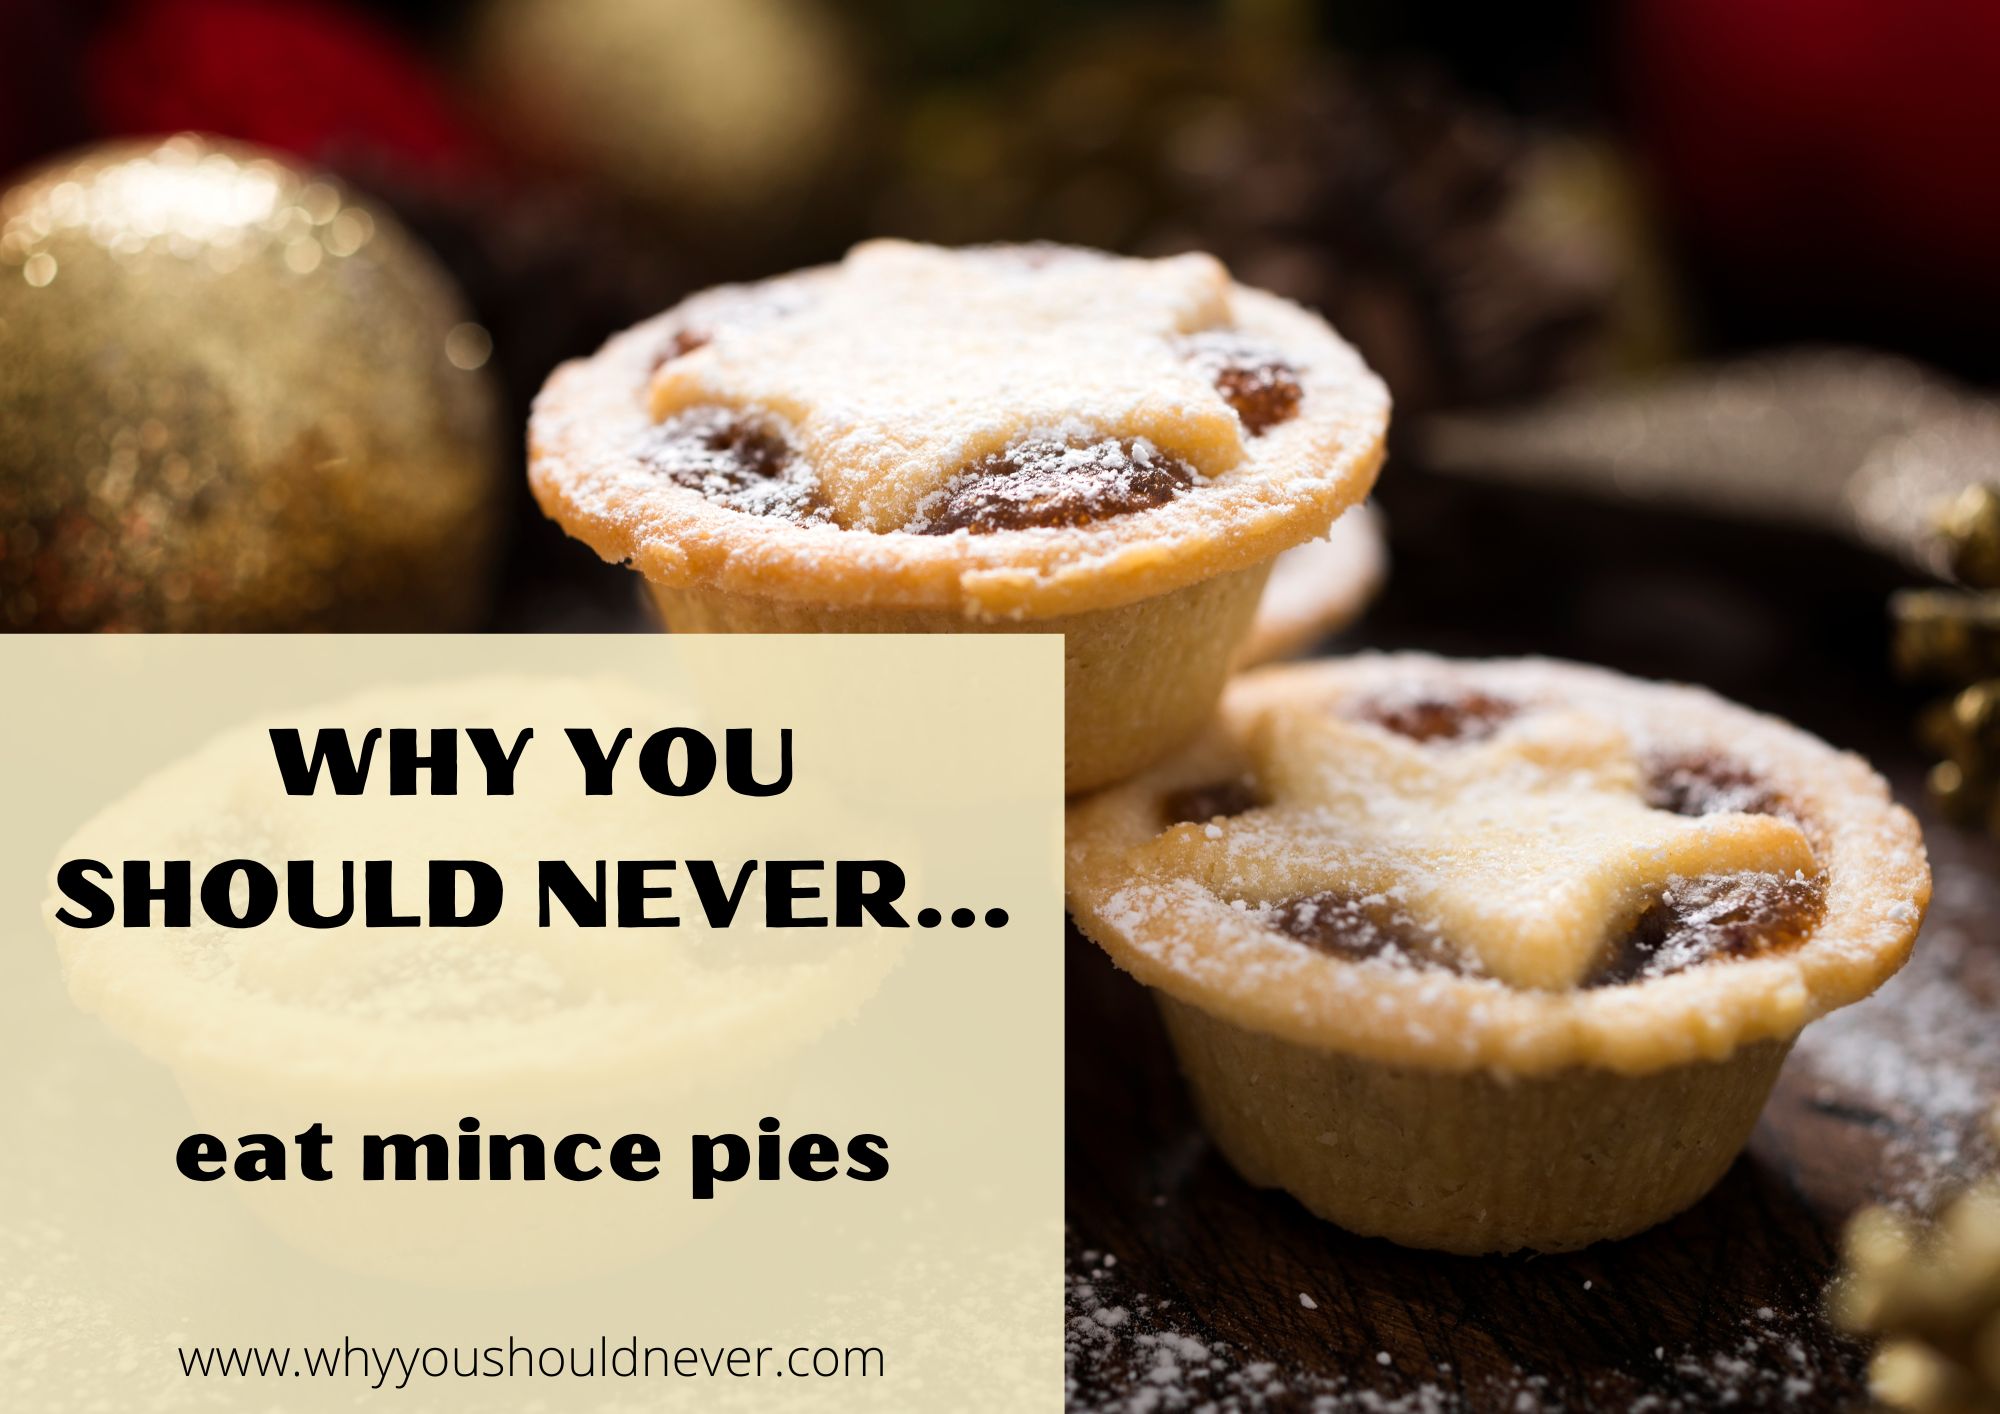 Why You Should Never Eat Mince Pies